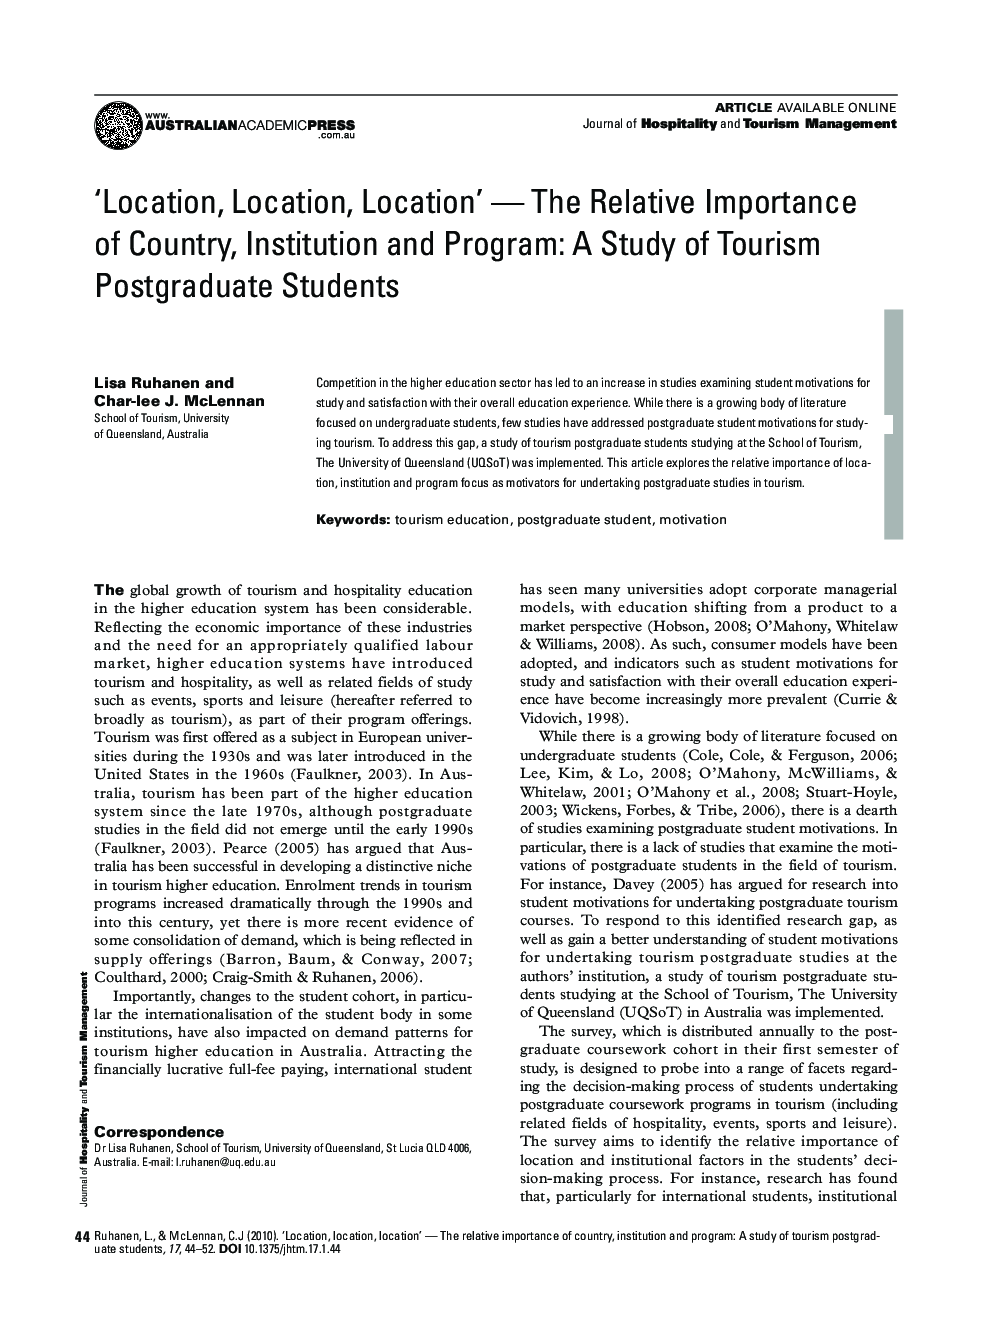 ‘Location, Location, Location’ — The Relative Importance of Country, Institution and Program: A Study of Tourism Postgraduate Students